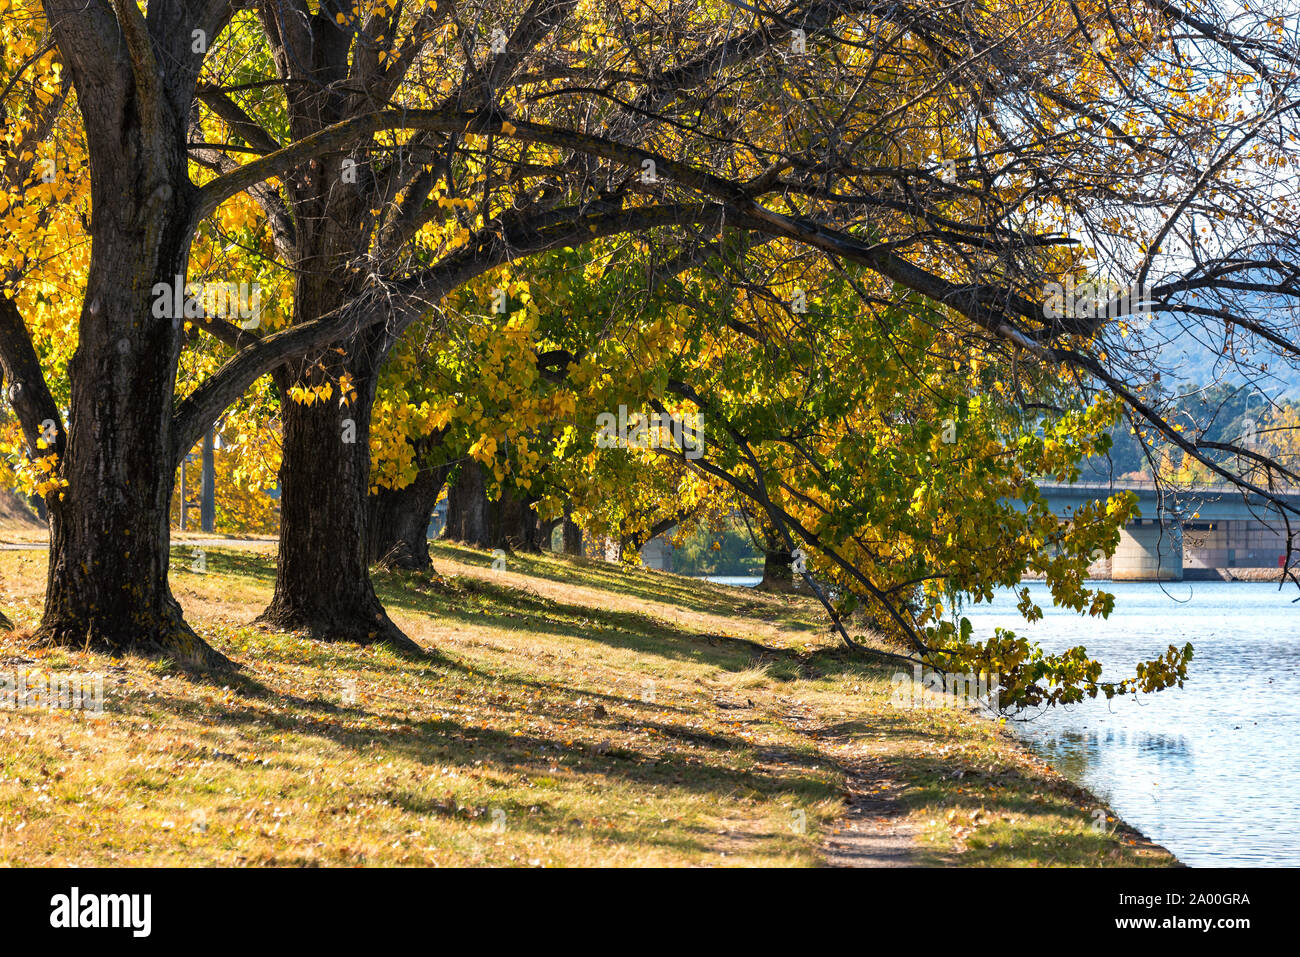 Autumnal landscape with colorful trees alley and Lake Burley Griffin the background. Bowen Park, Canberra, Australian Capital Territory, Australia. Se Stock Photo